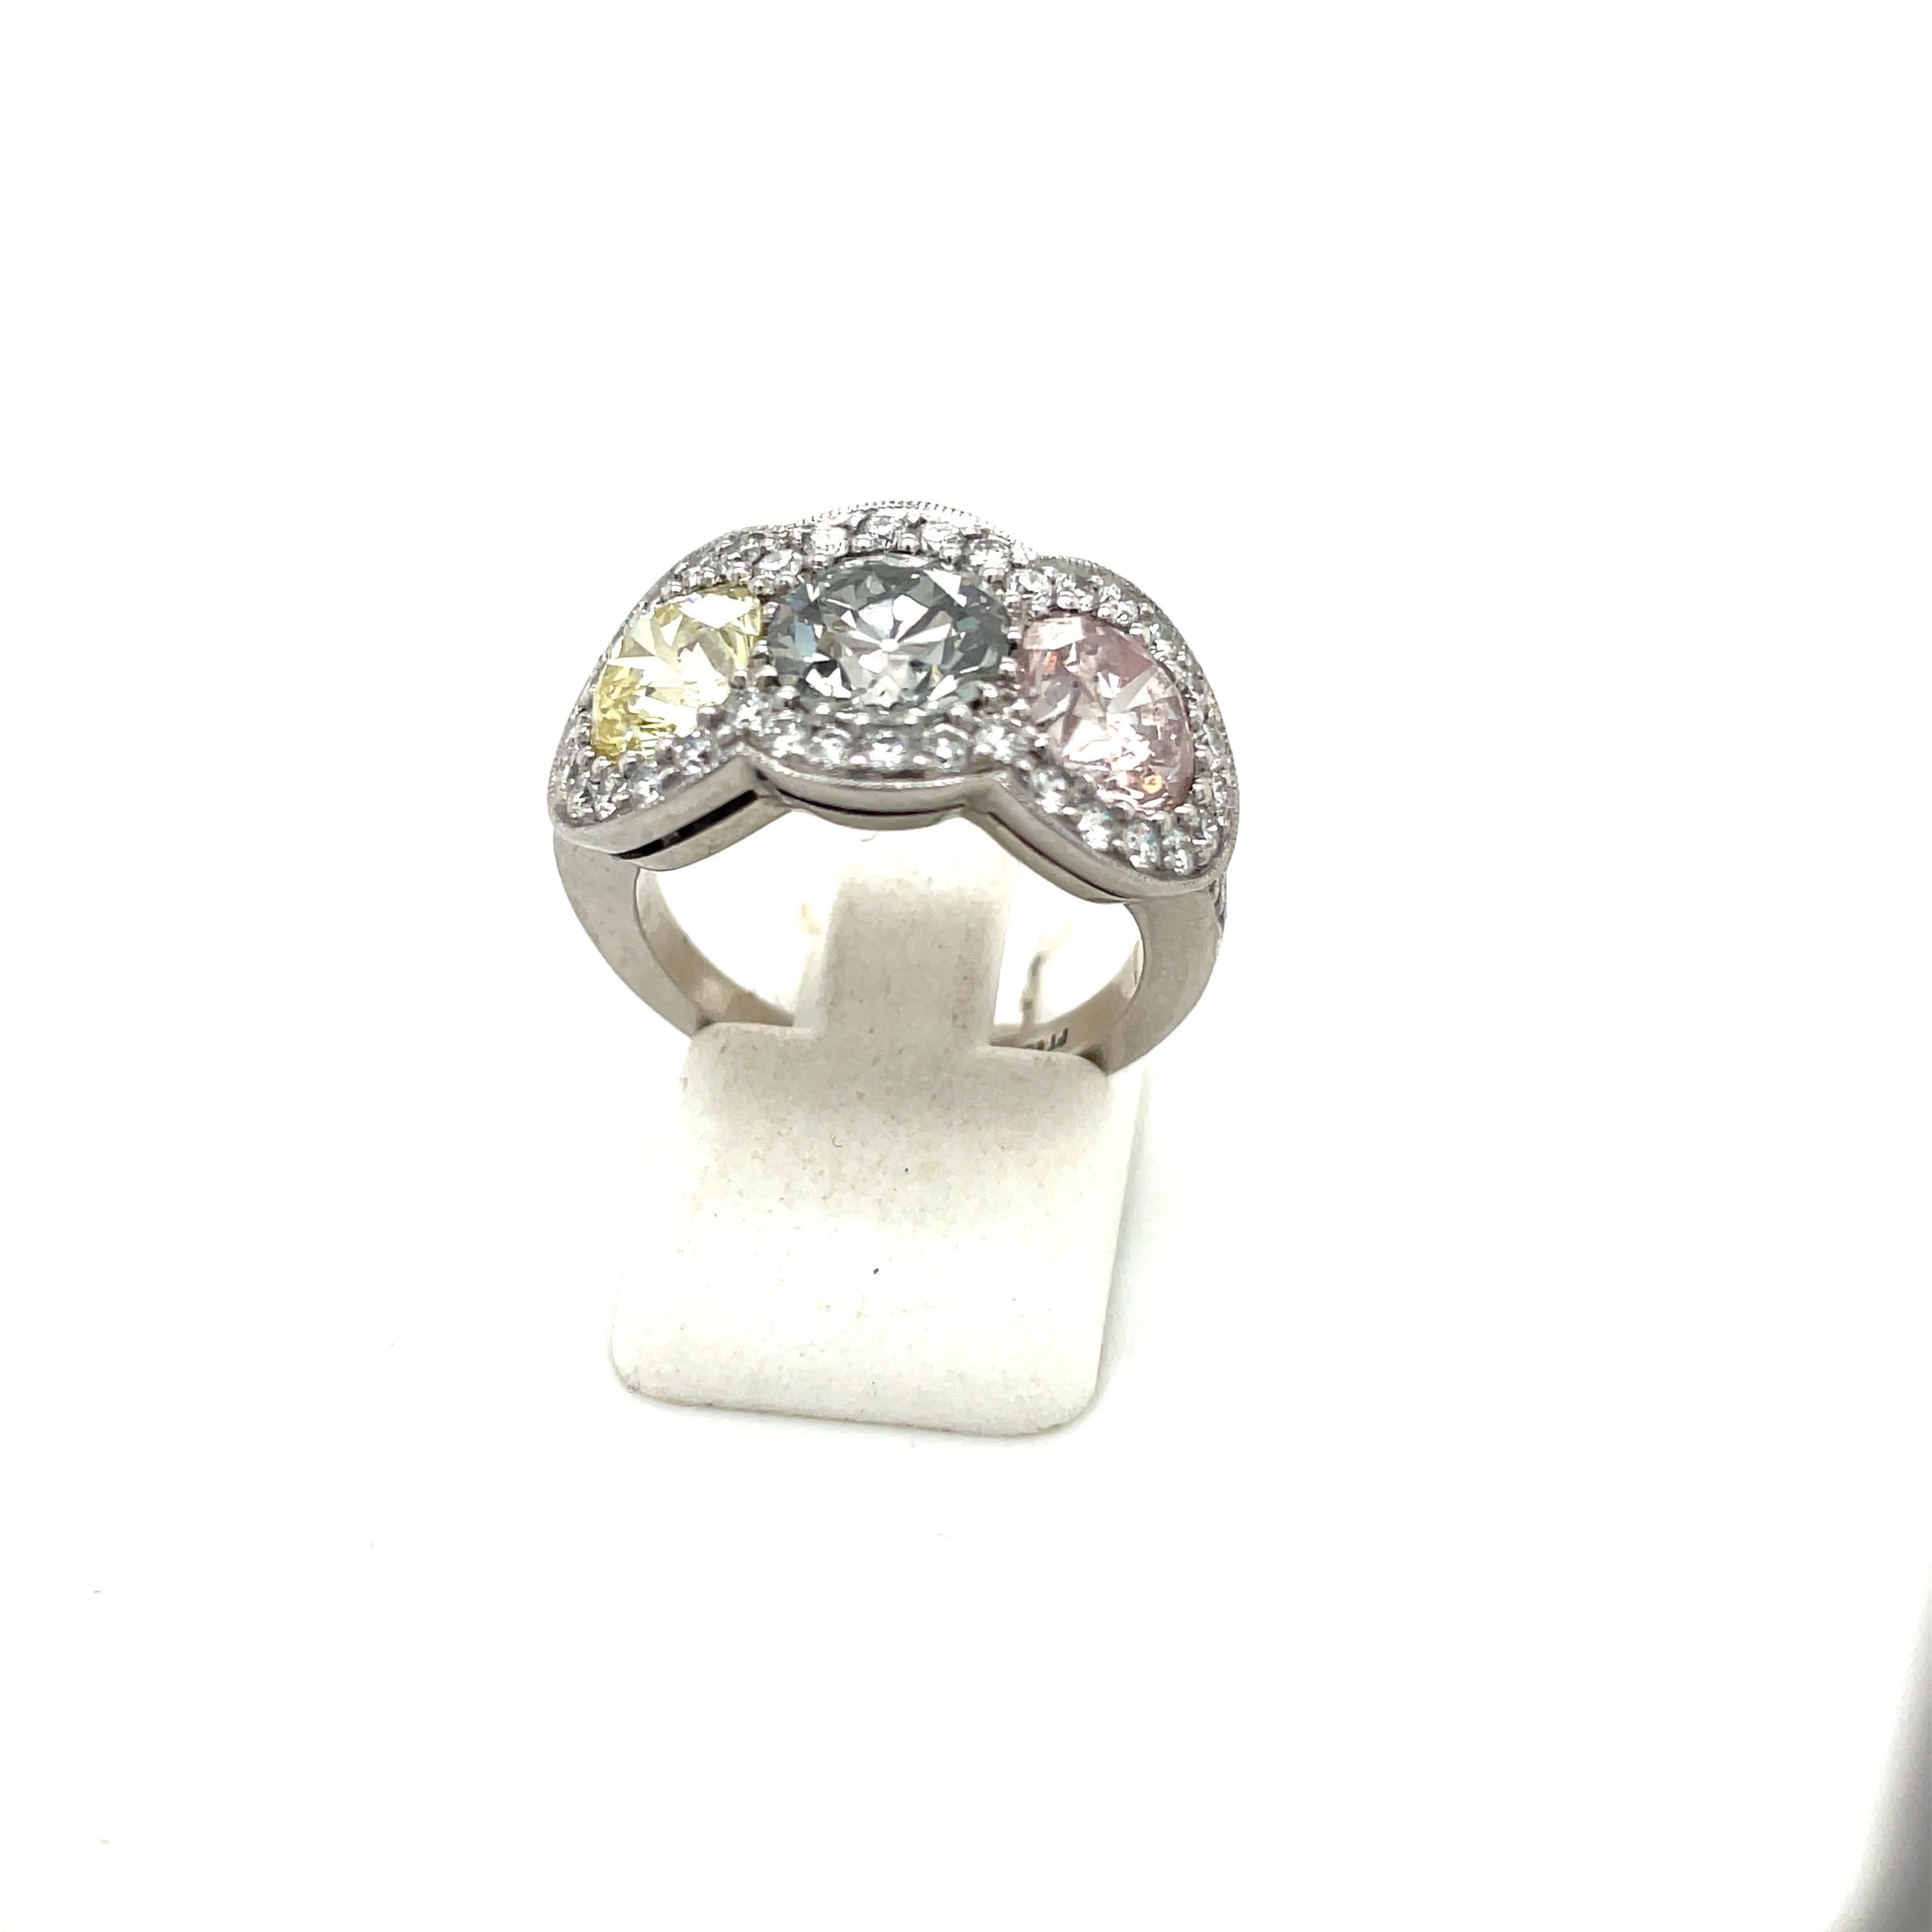 Classic and elegant is the best way to describe this 3 stone fancy colored diamond ring. The 3 brilliant cut pink, yellow and grey diamonds are set in a platinum setting. Each center stone is surrounded by white brilliant cut diamonds. The setting